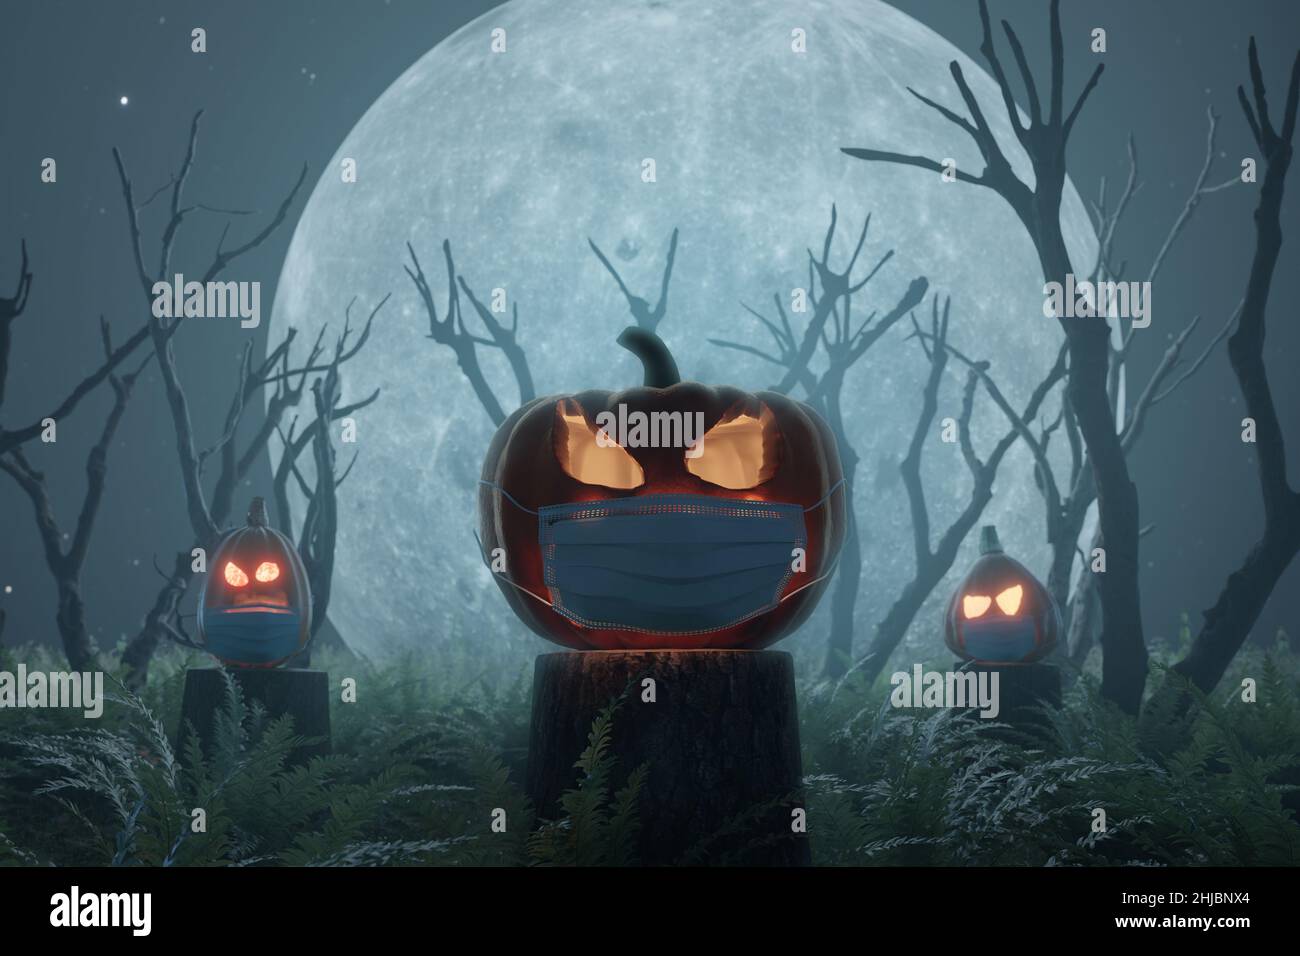 3d rendering of shiny halloween Jack o' Lantern pumpkins covered with a face mask in front of big moon and dead trees Stock Photo